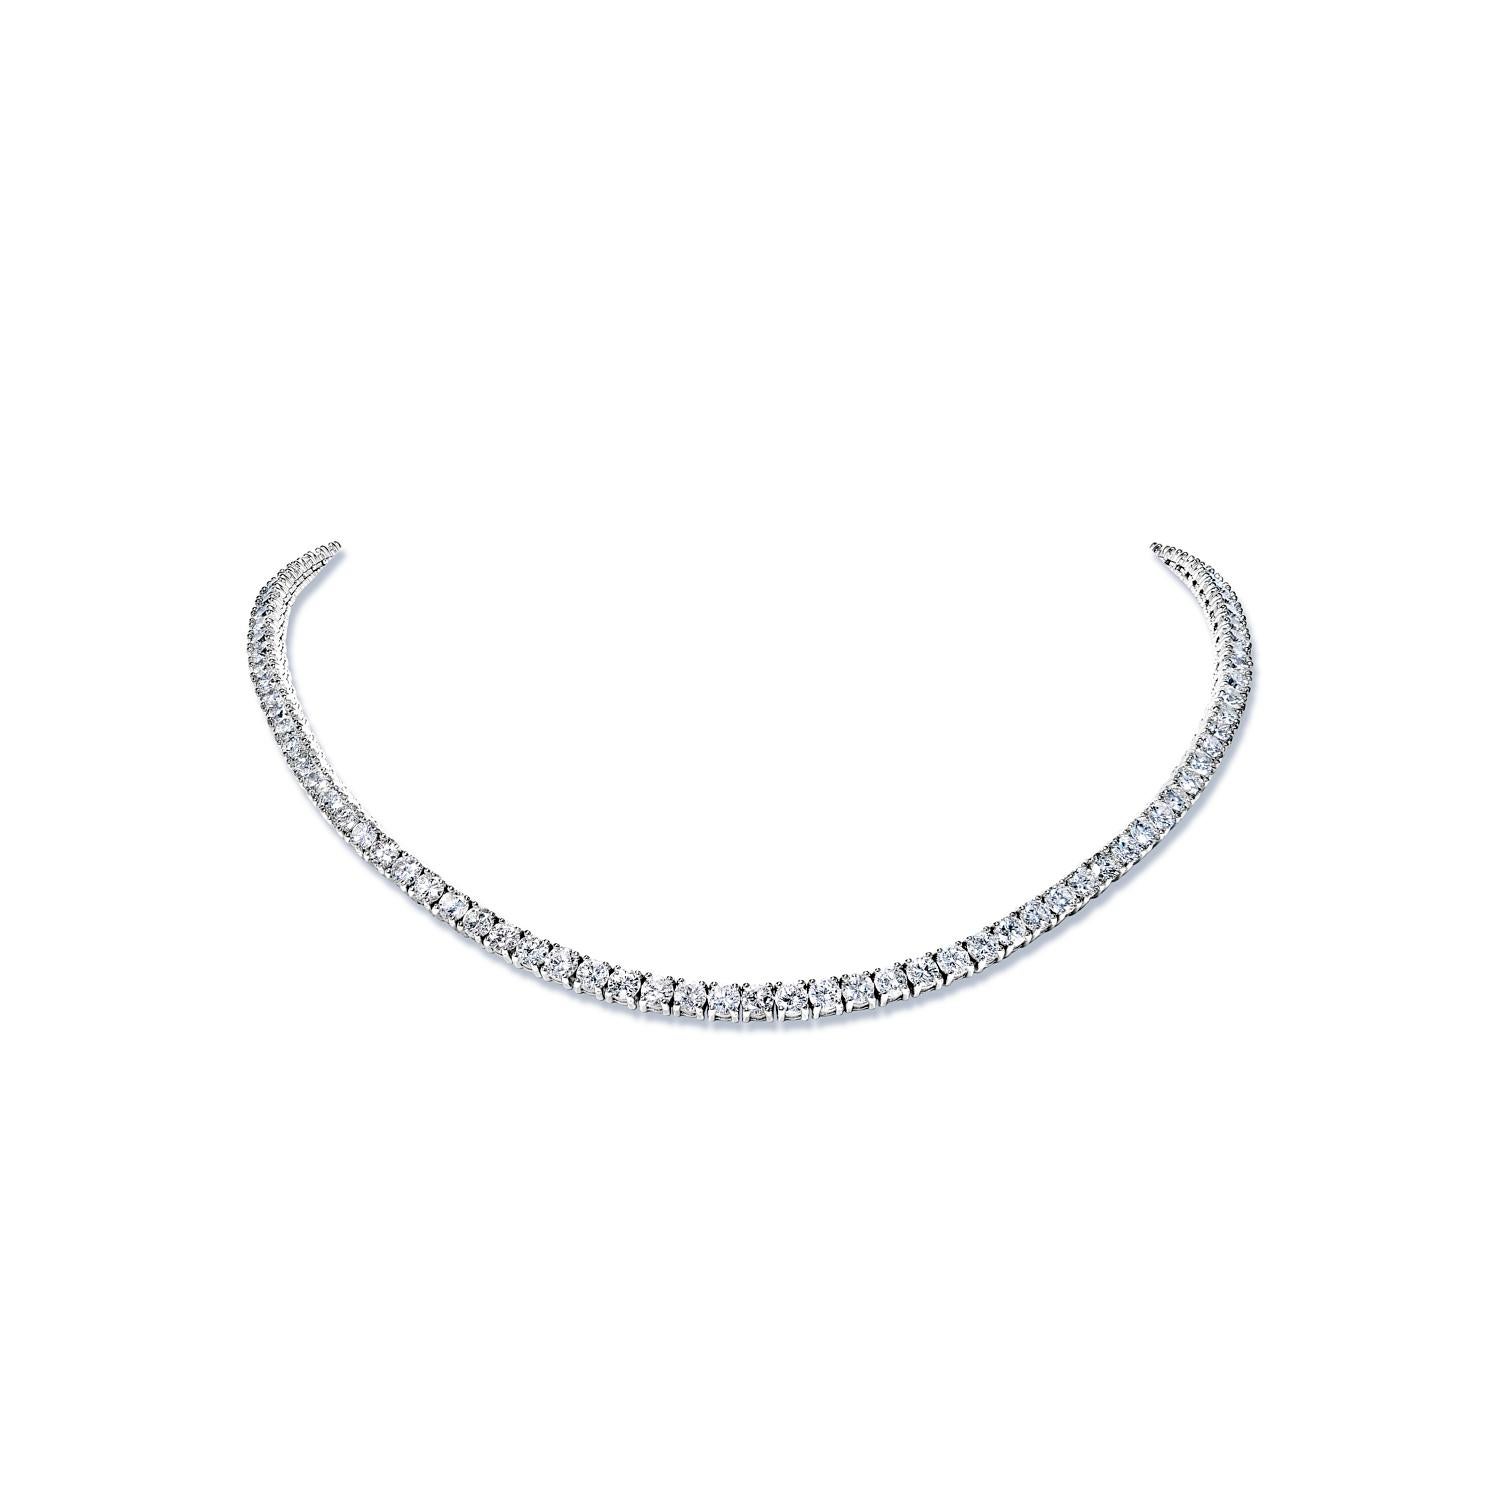 Earth Mined Diamond:
Carat Weight: 21.73 Carats
Style: Round Brilliant Cut
Chains: 14 Karat White Gold